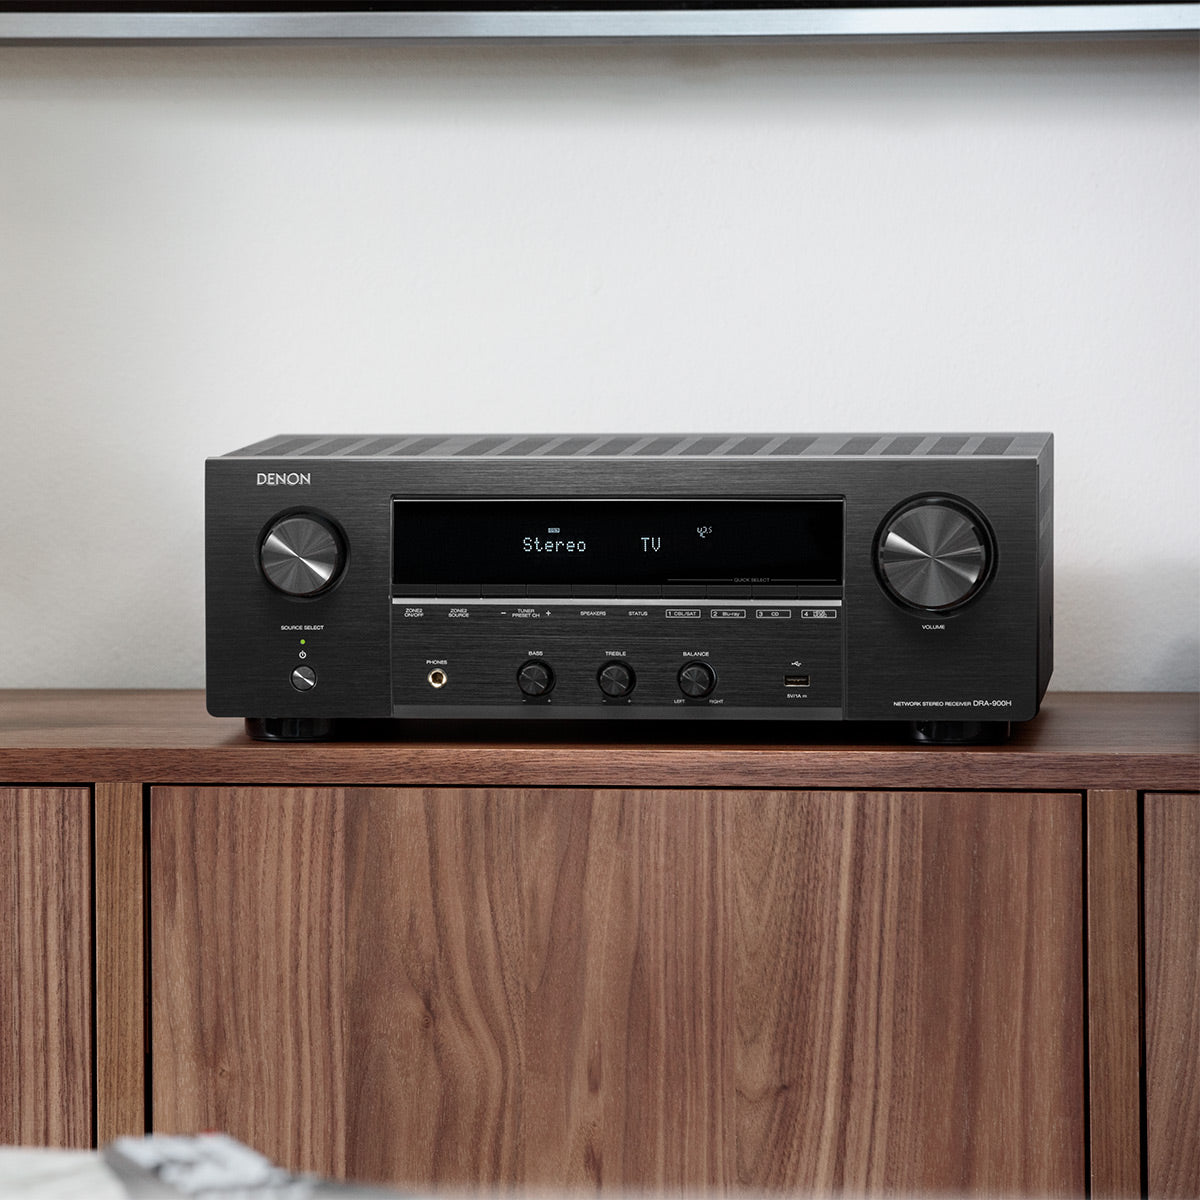 Denon DRA-900H 2.1 Channel 8K Receiver Stereo with Stereo Wide AV | World HEOS Built-In